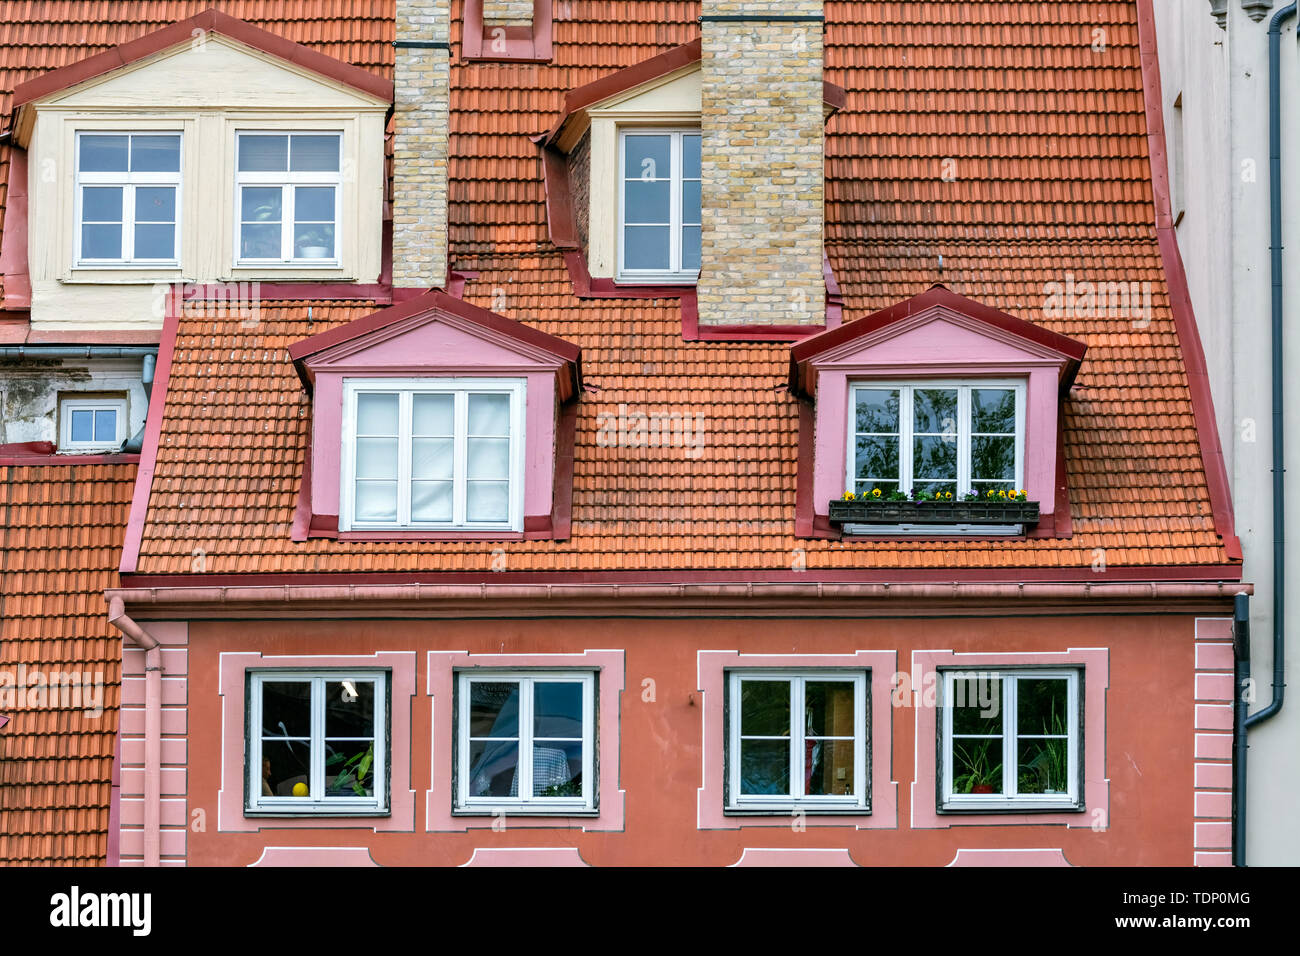 View of the roof of red tiles with attics in the old part of Riga. Stock Photo